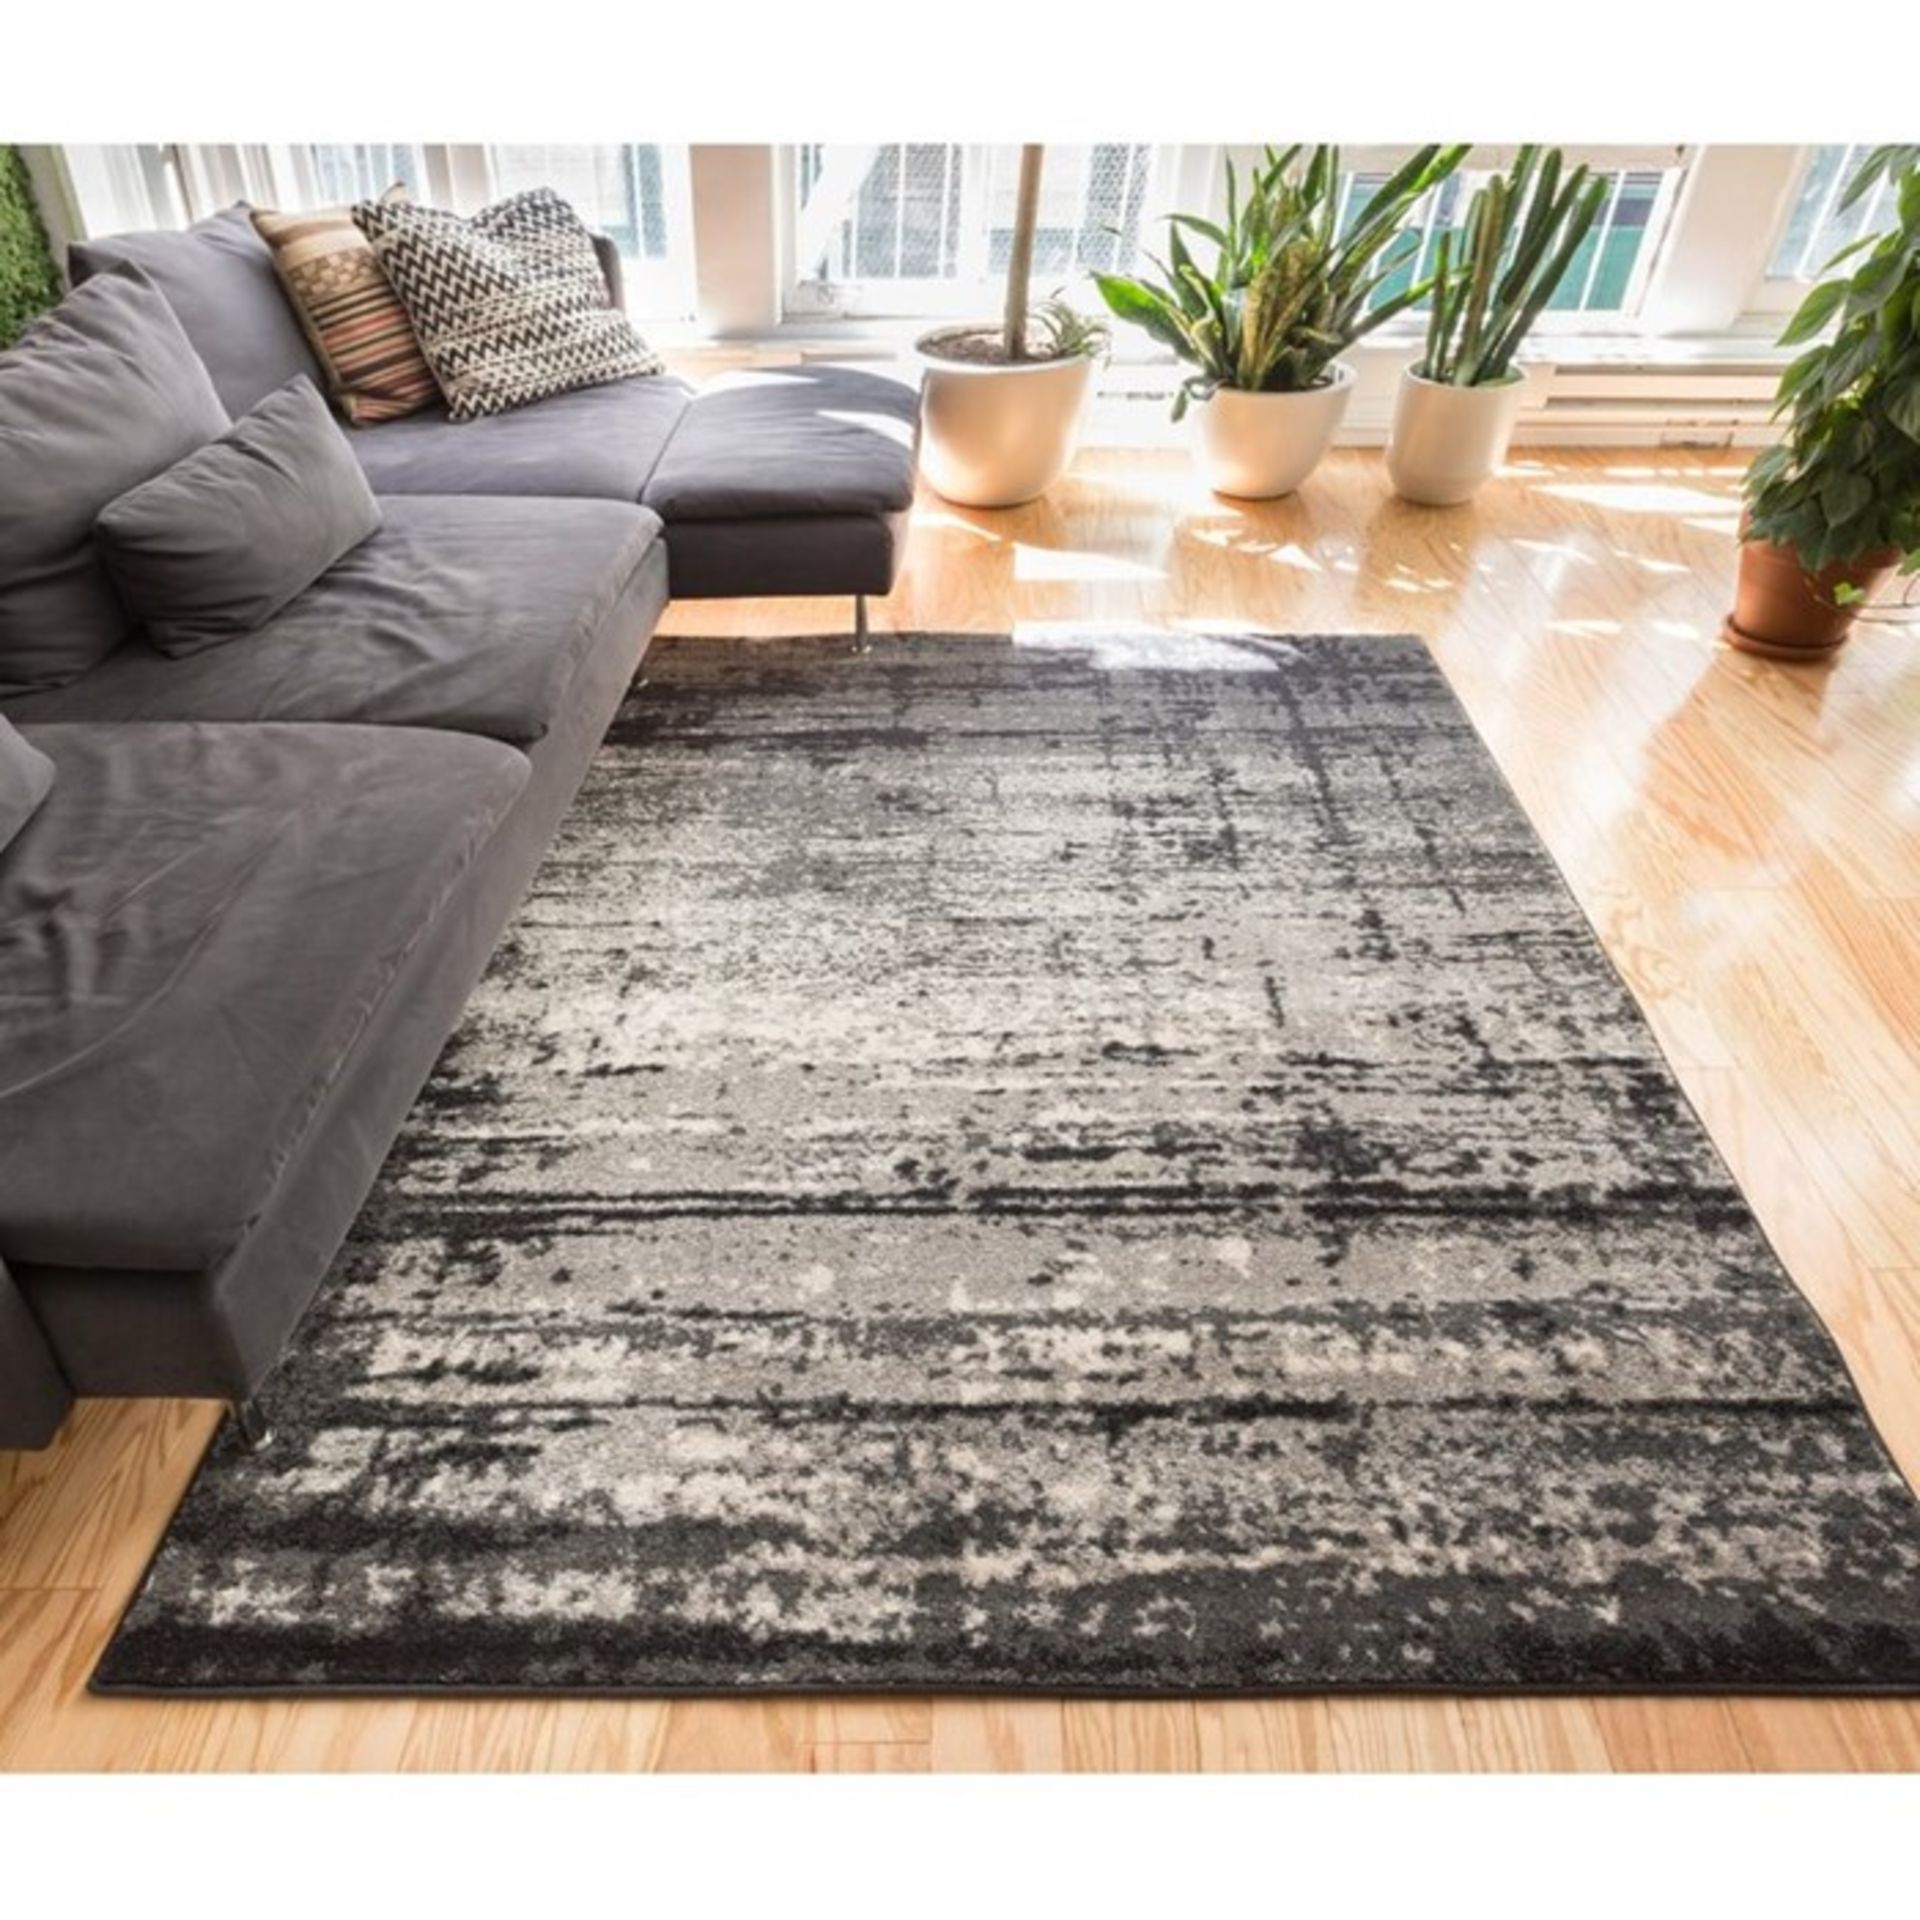 Well Woven,Sydney Vintage Distressed Crosby Charcoal Grey Rug (80X365)(18419/11 -WEWO1032) RRP £81.